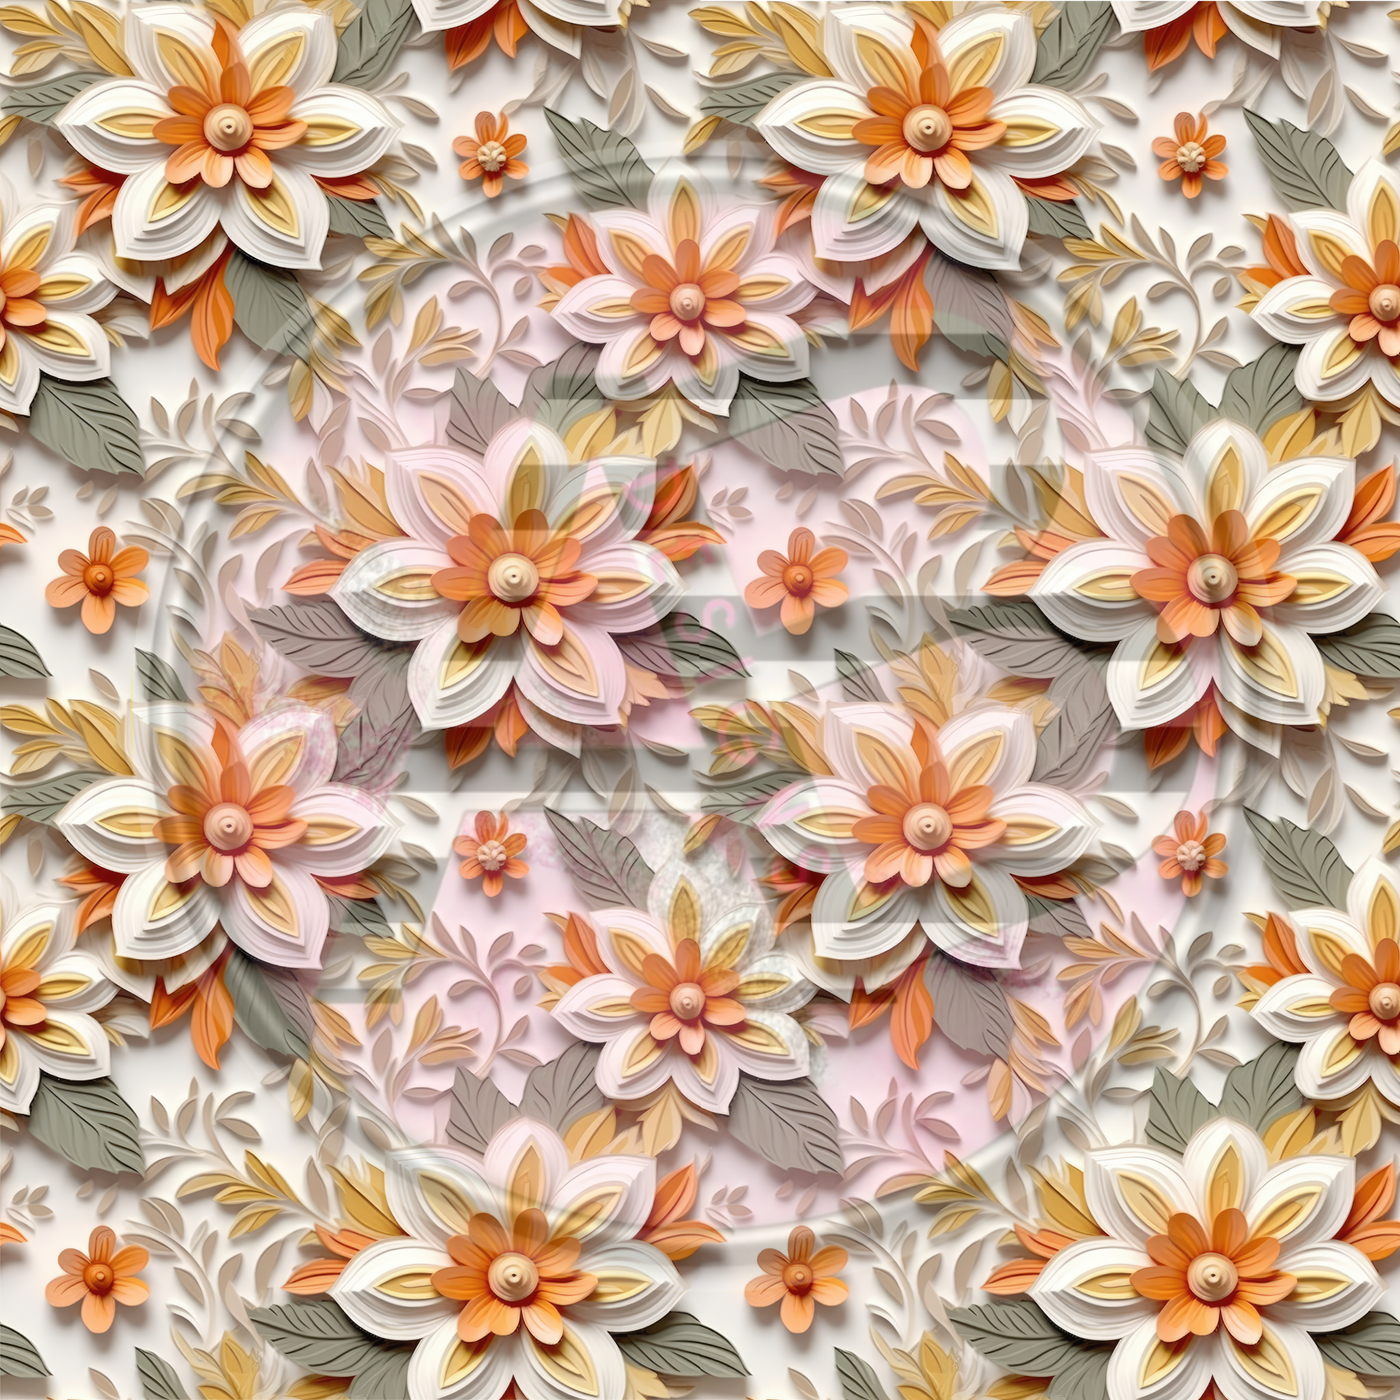 Adhesive Patterned Vinyl - 3D Floral 03 Smaller